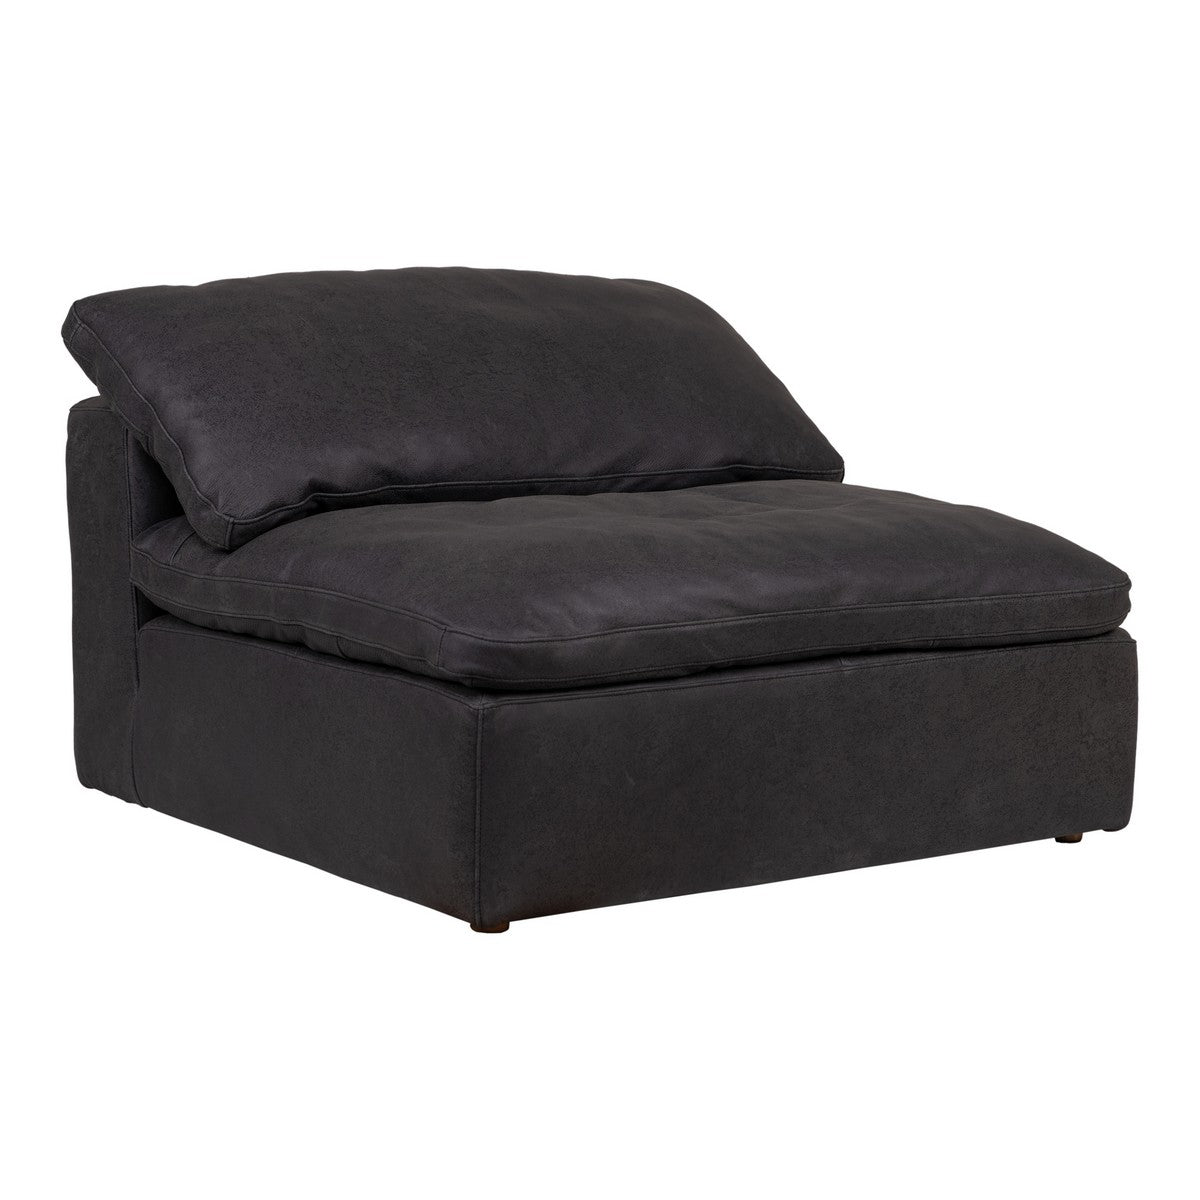 Moe's Home Collection Clay Slipper Chair Nubuck Leather Black - YJ-1005-02